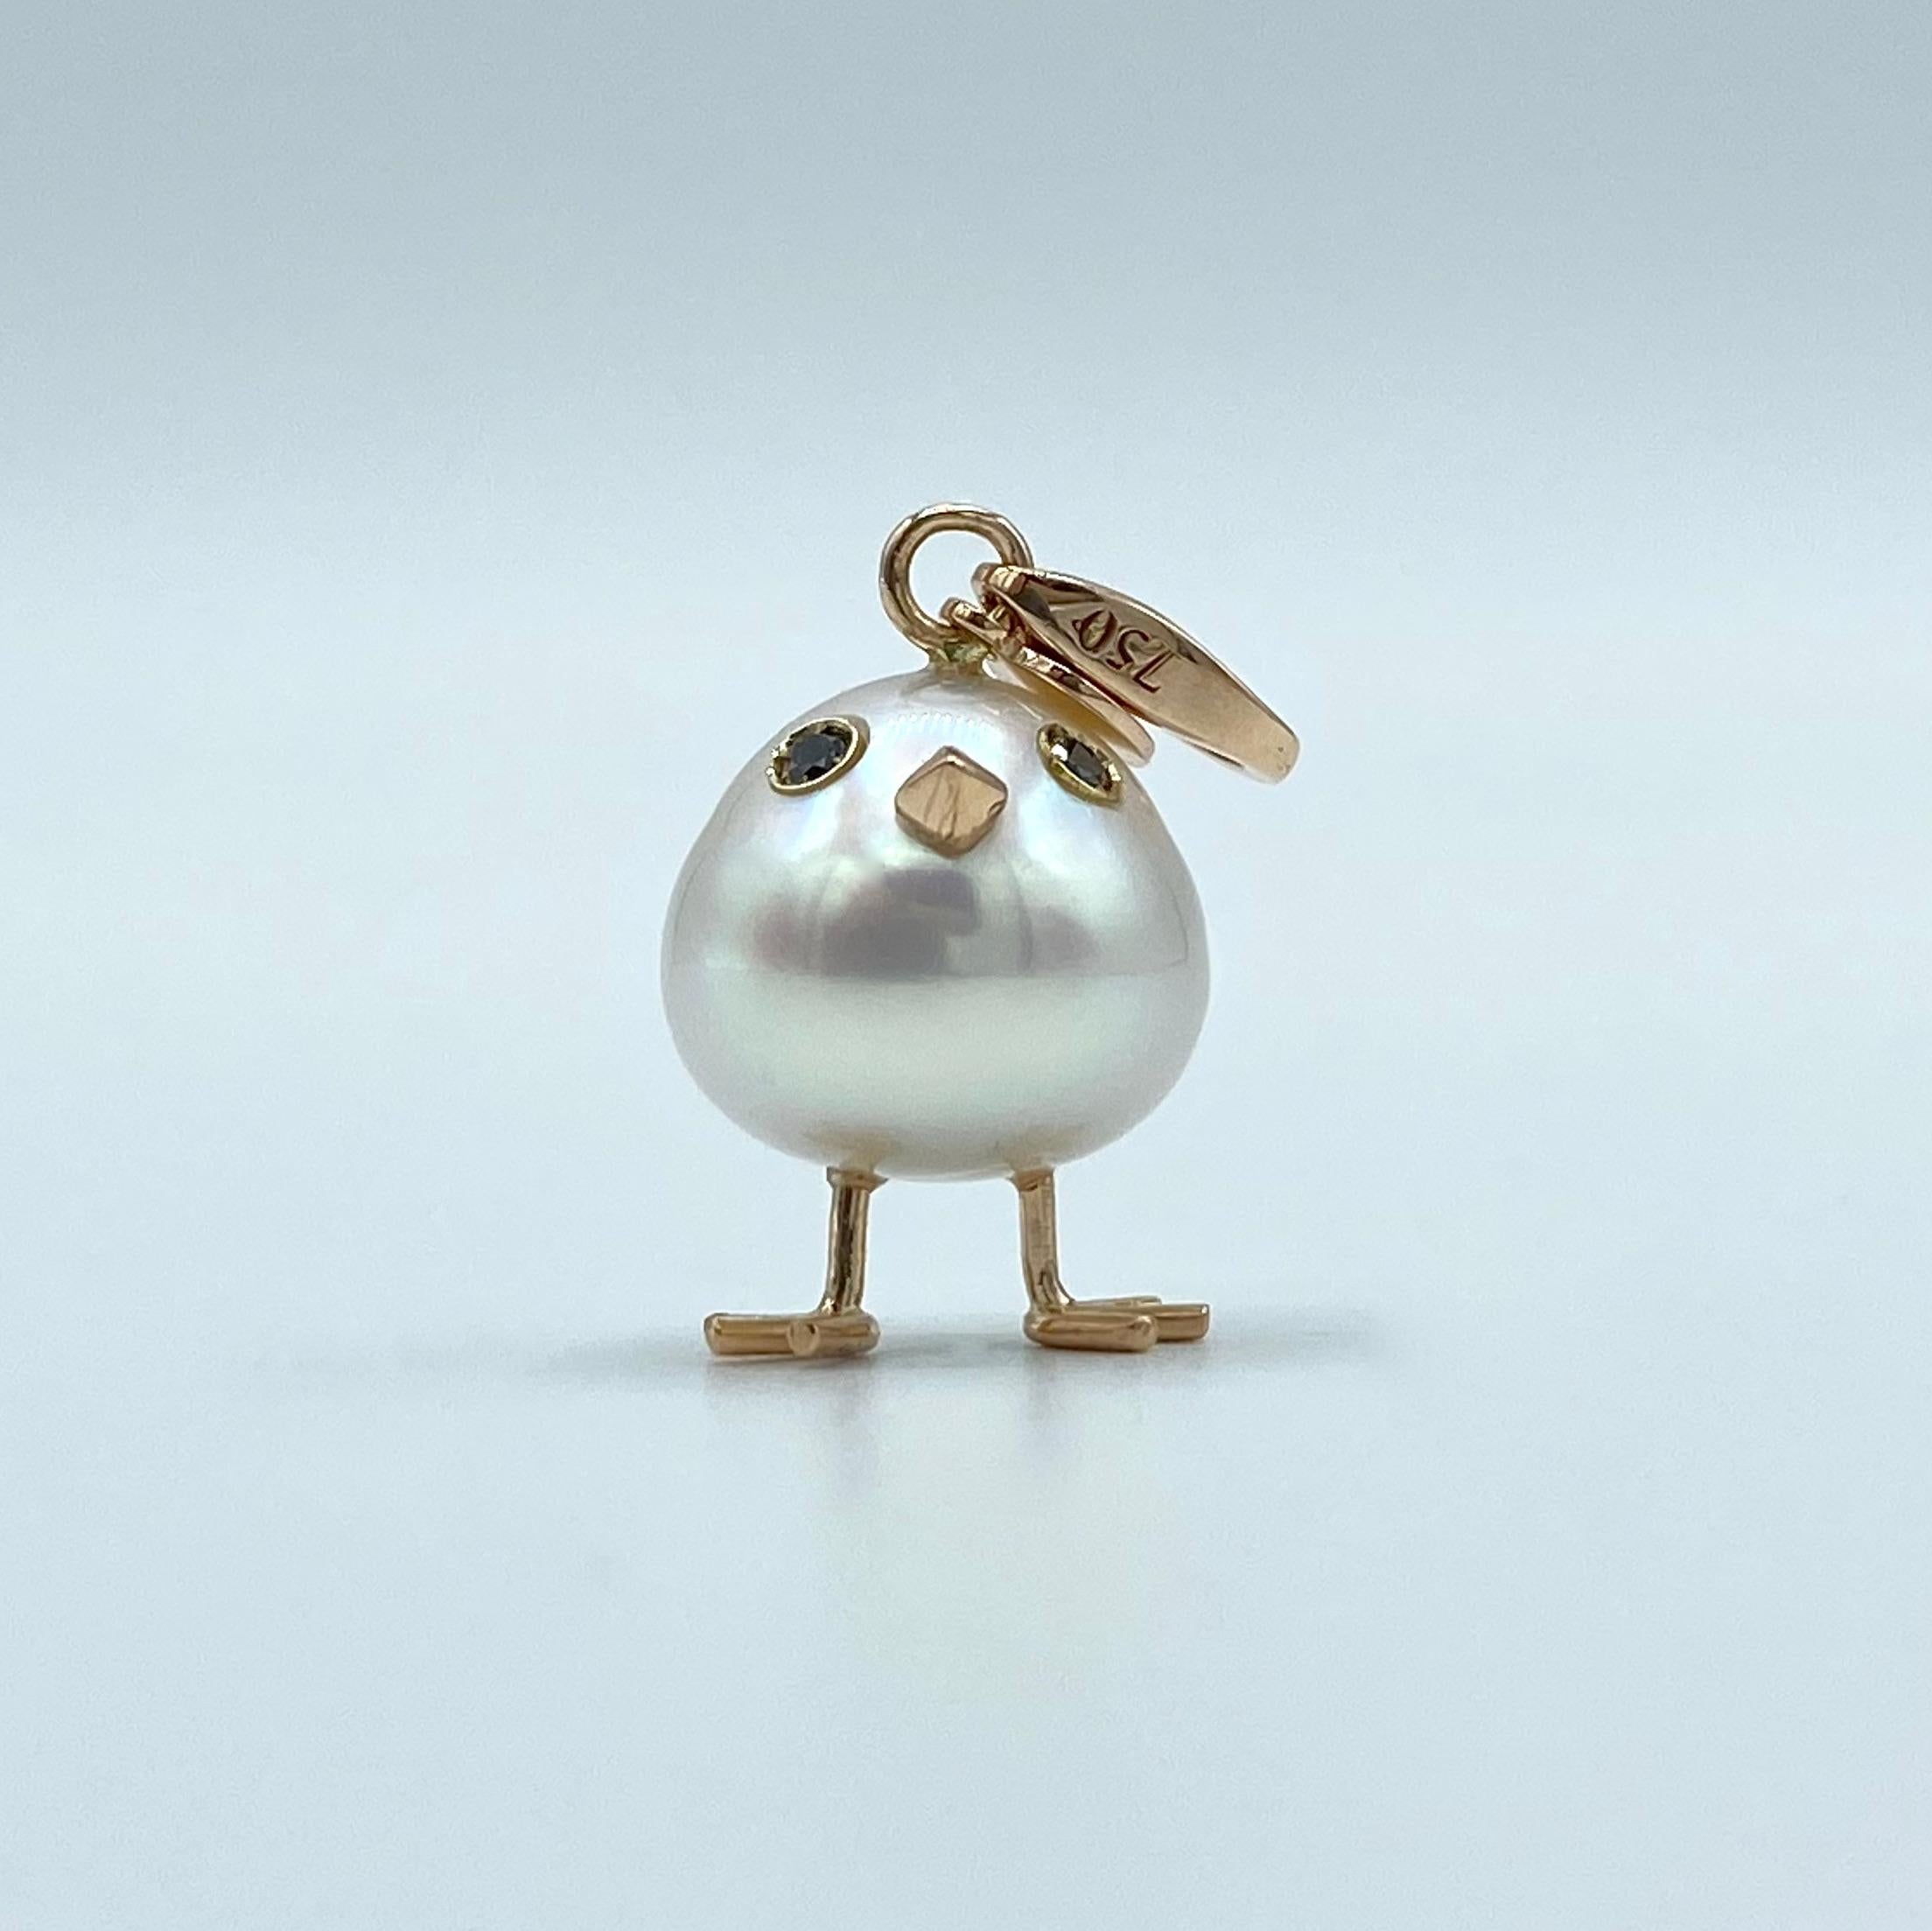 Chick Gold Pearl White Diamond 18Kt Gold Pendant Necklace or Charm 
A beautiful Australian pearl has been carefully crafted to make a chick. He has his two legs, two eyes encrusted with two black diamonds and his beak. The ring for the necklace is a